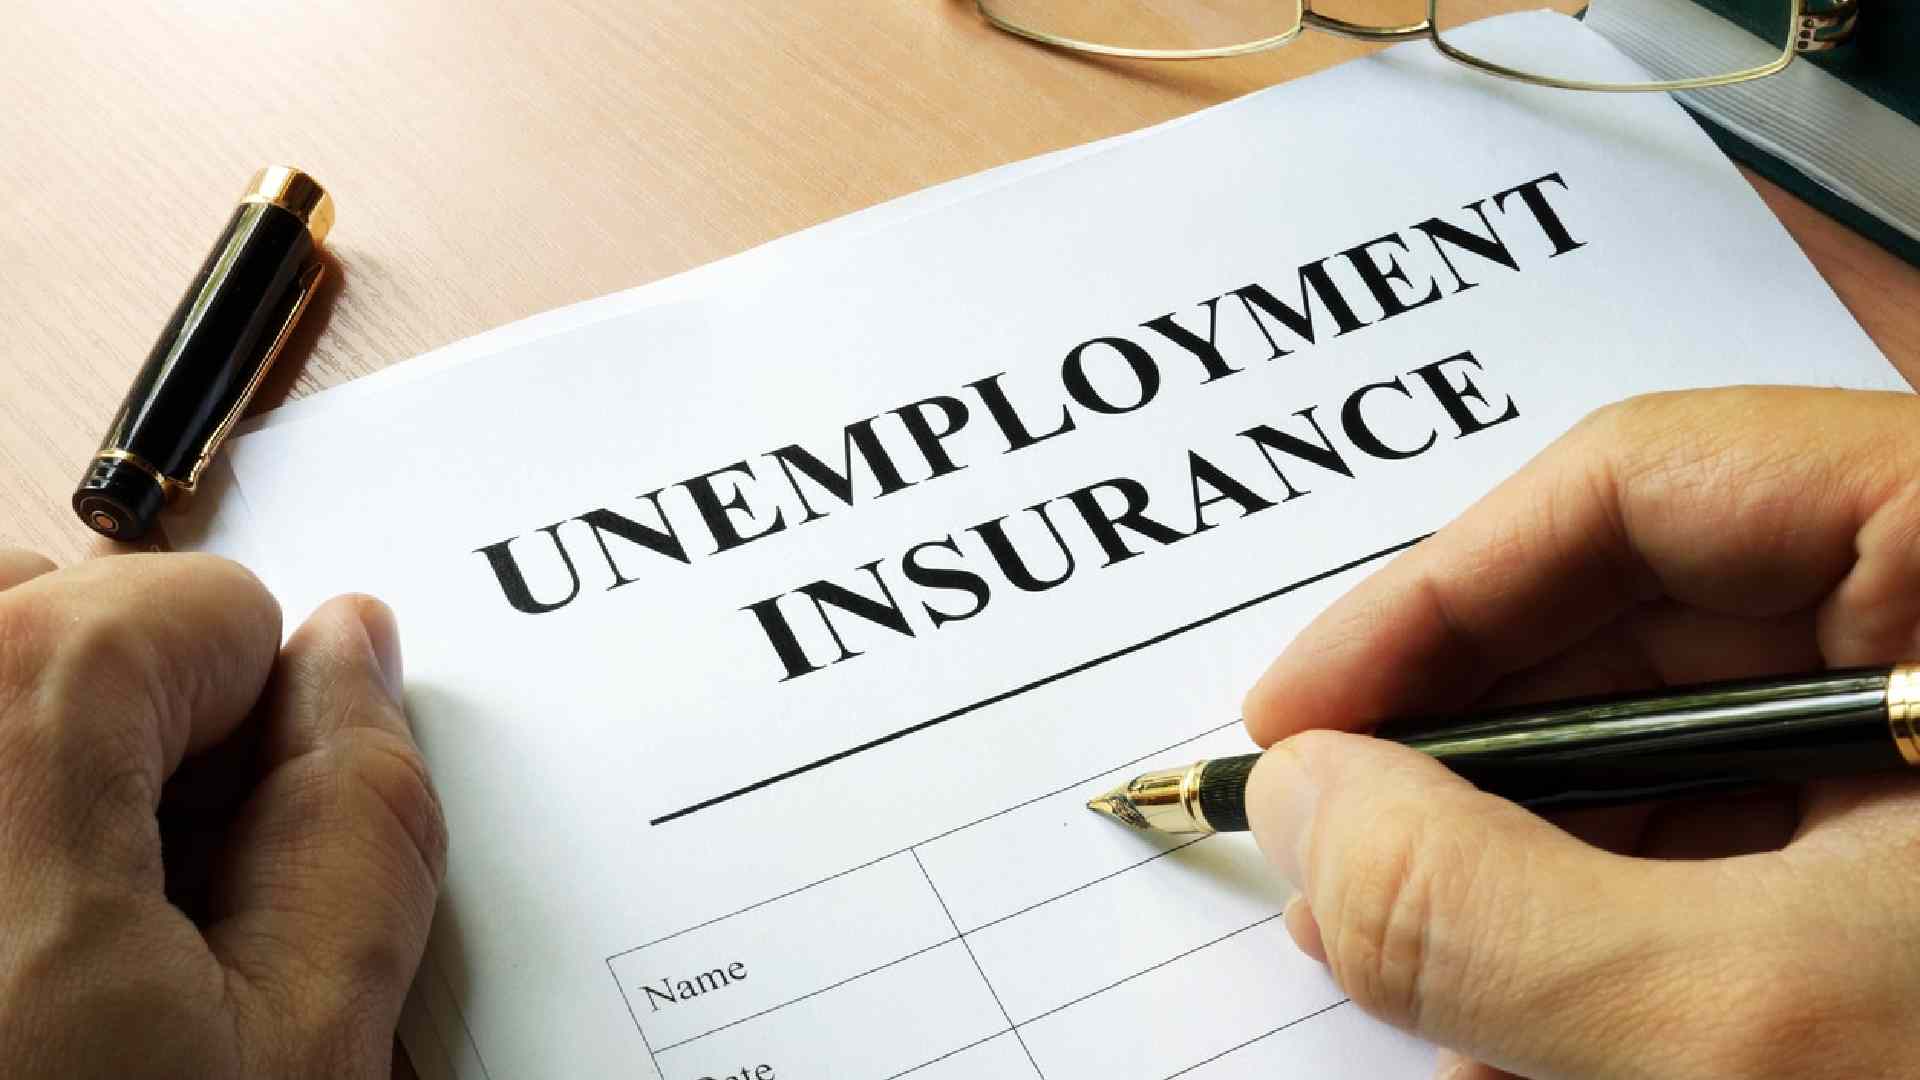 unemployment insurance in the UAE